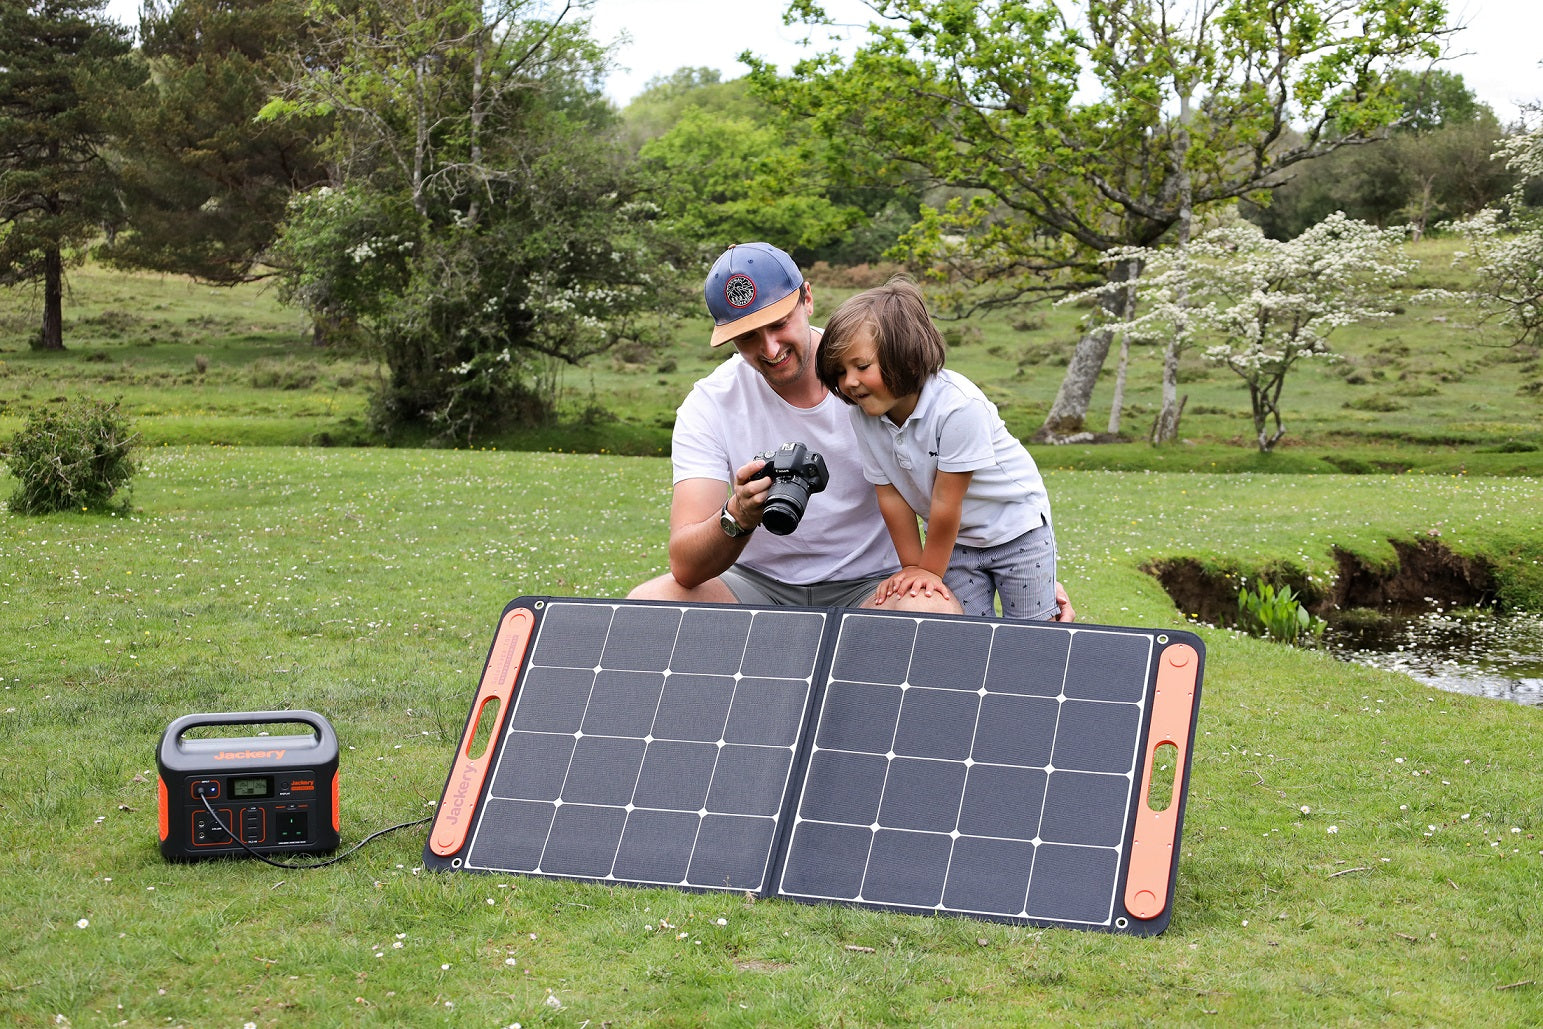 Jackery power station for fun outdoor activties